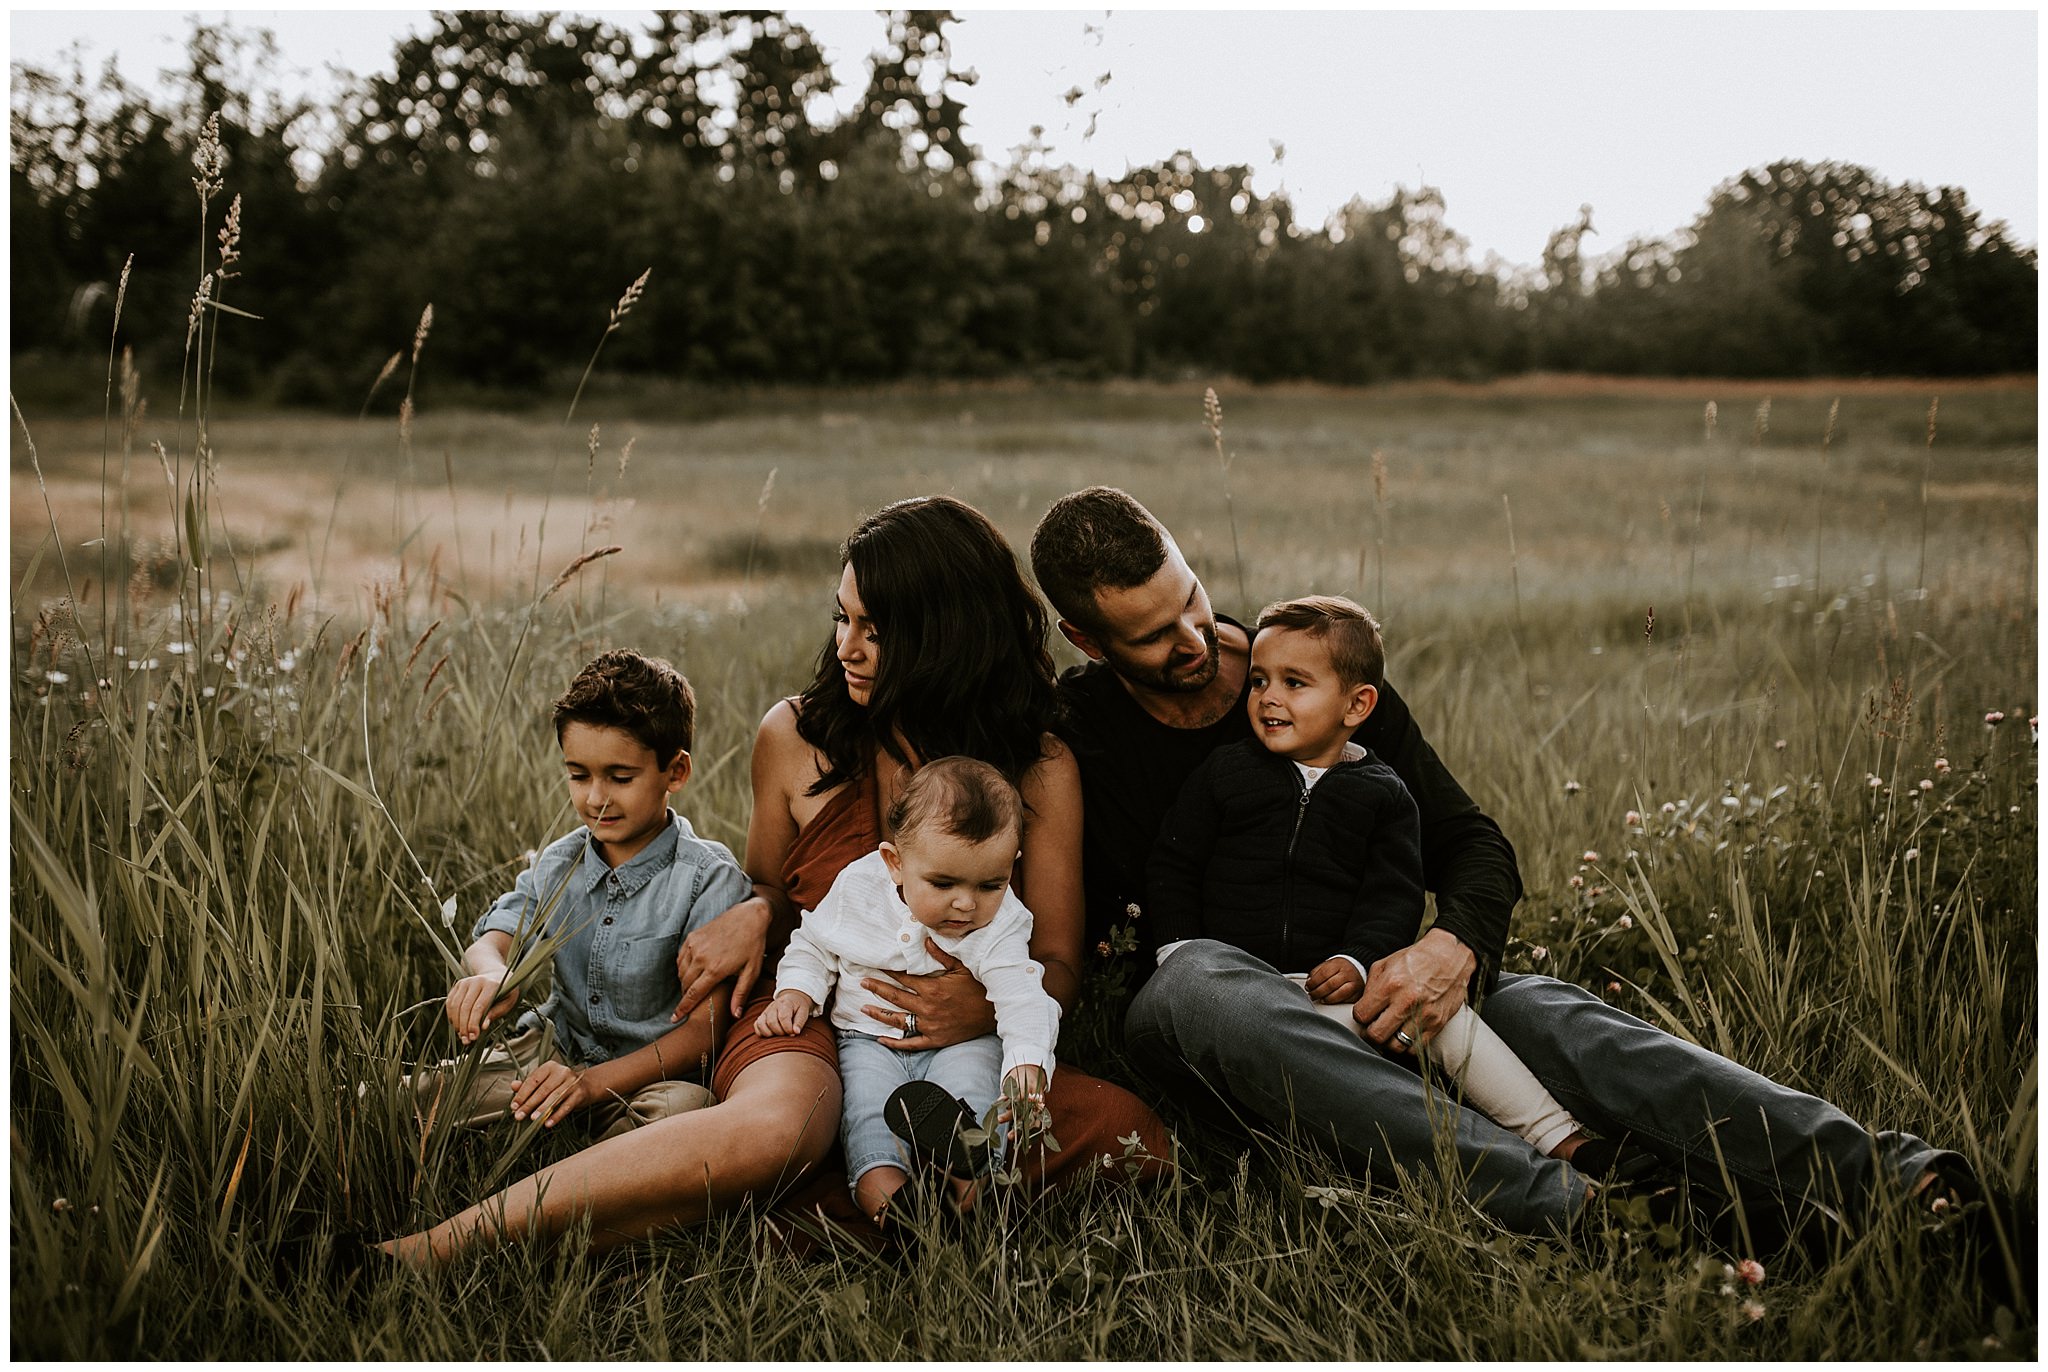 A golden hour family photoshoot in tall grass. Shot in Langley BC